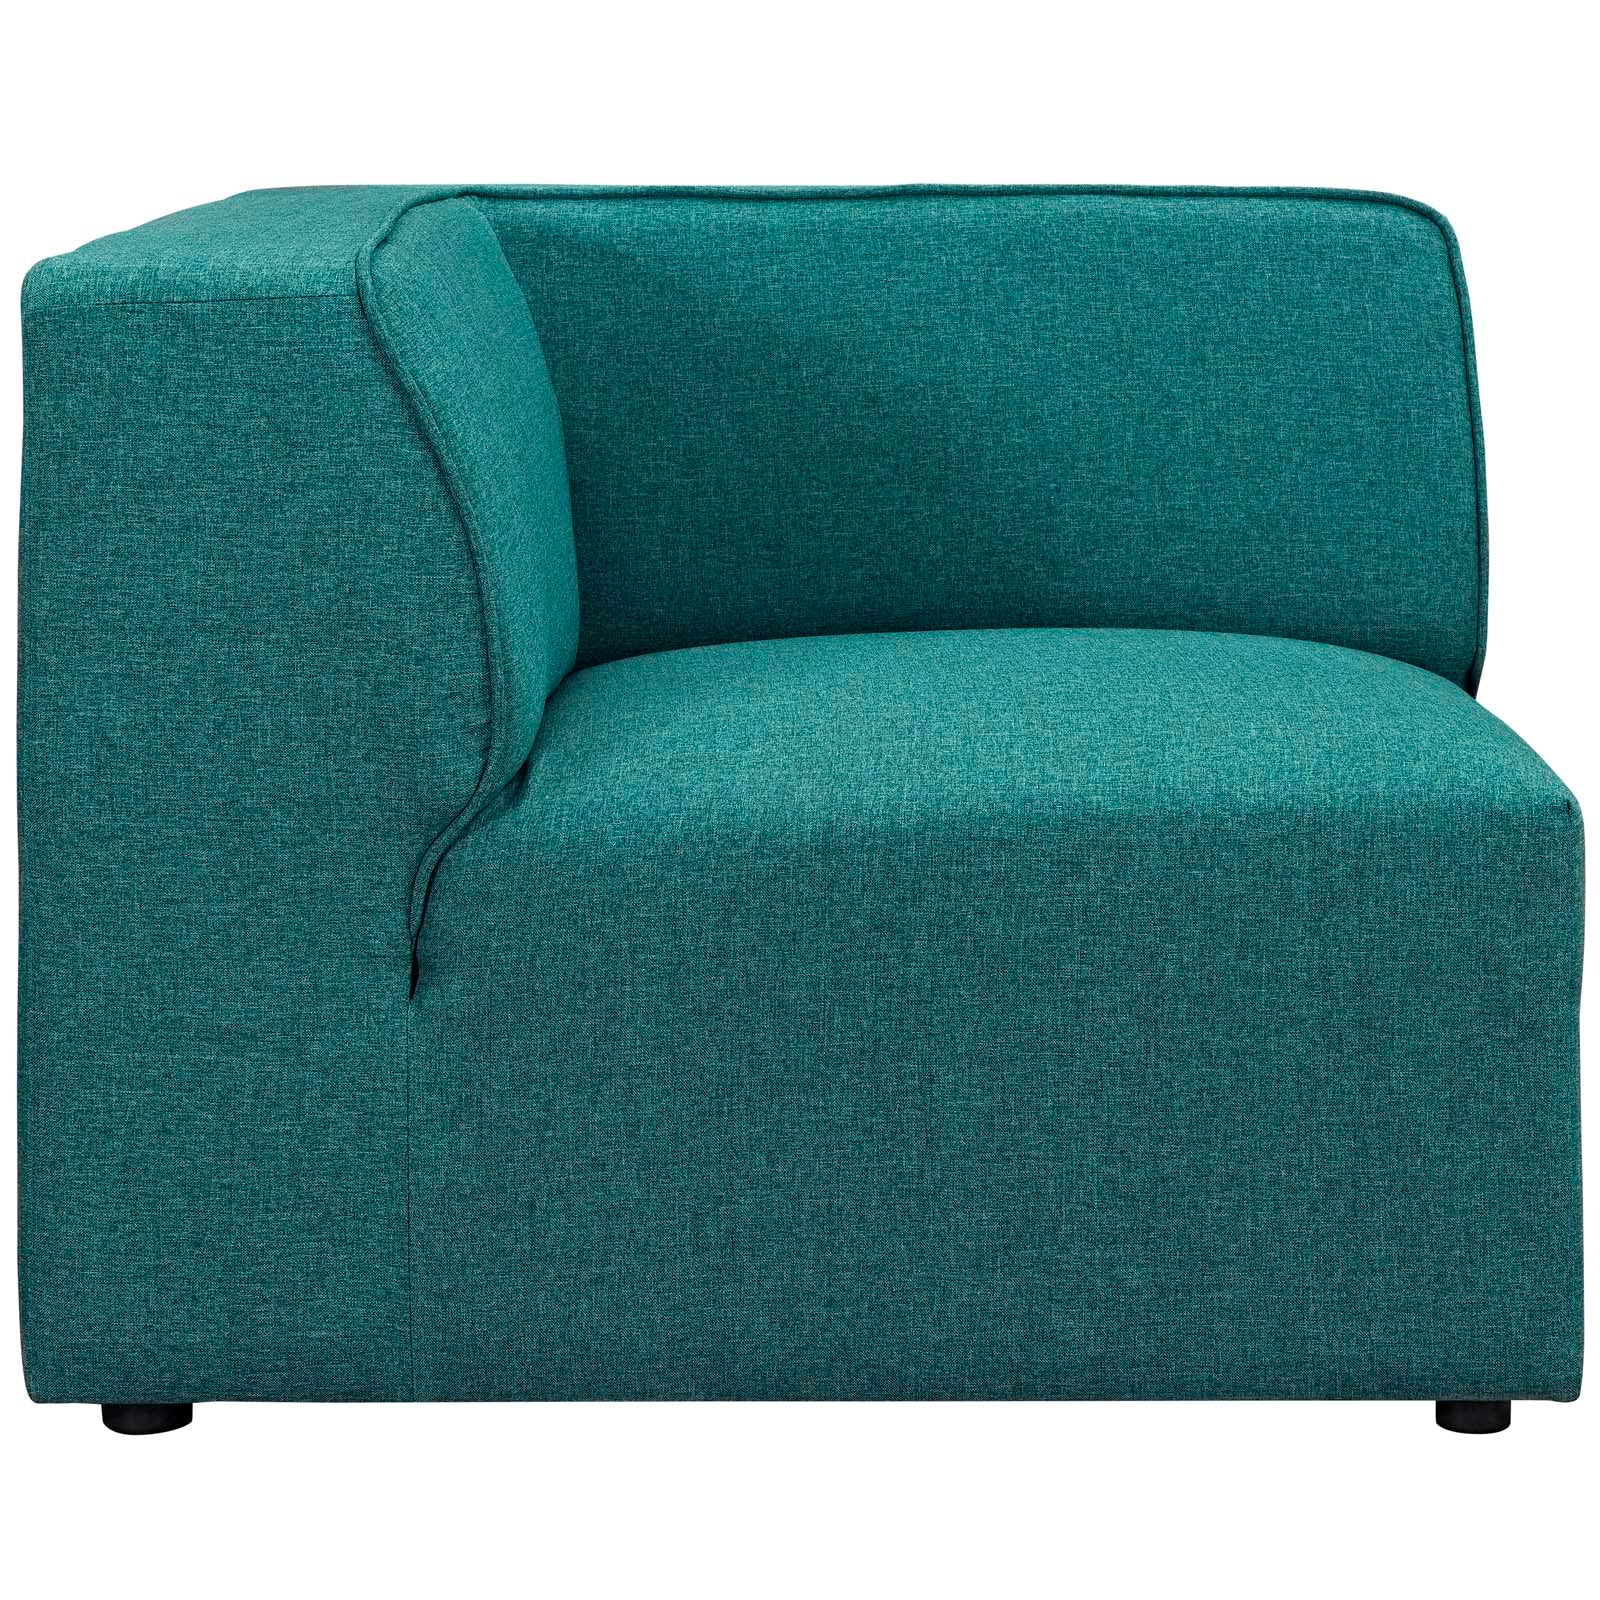 Modway Accent Chairs - Mingle Corner Sofa Teal